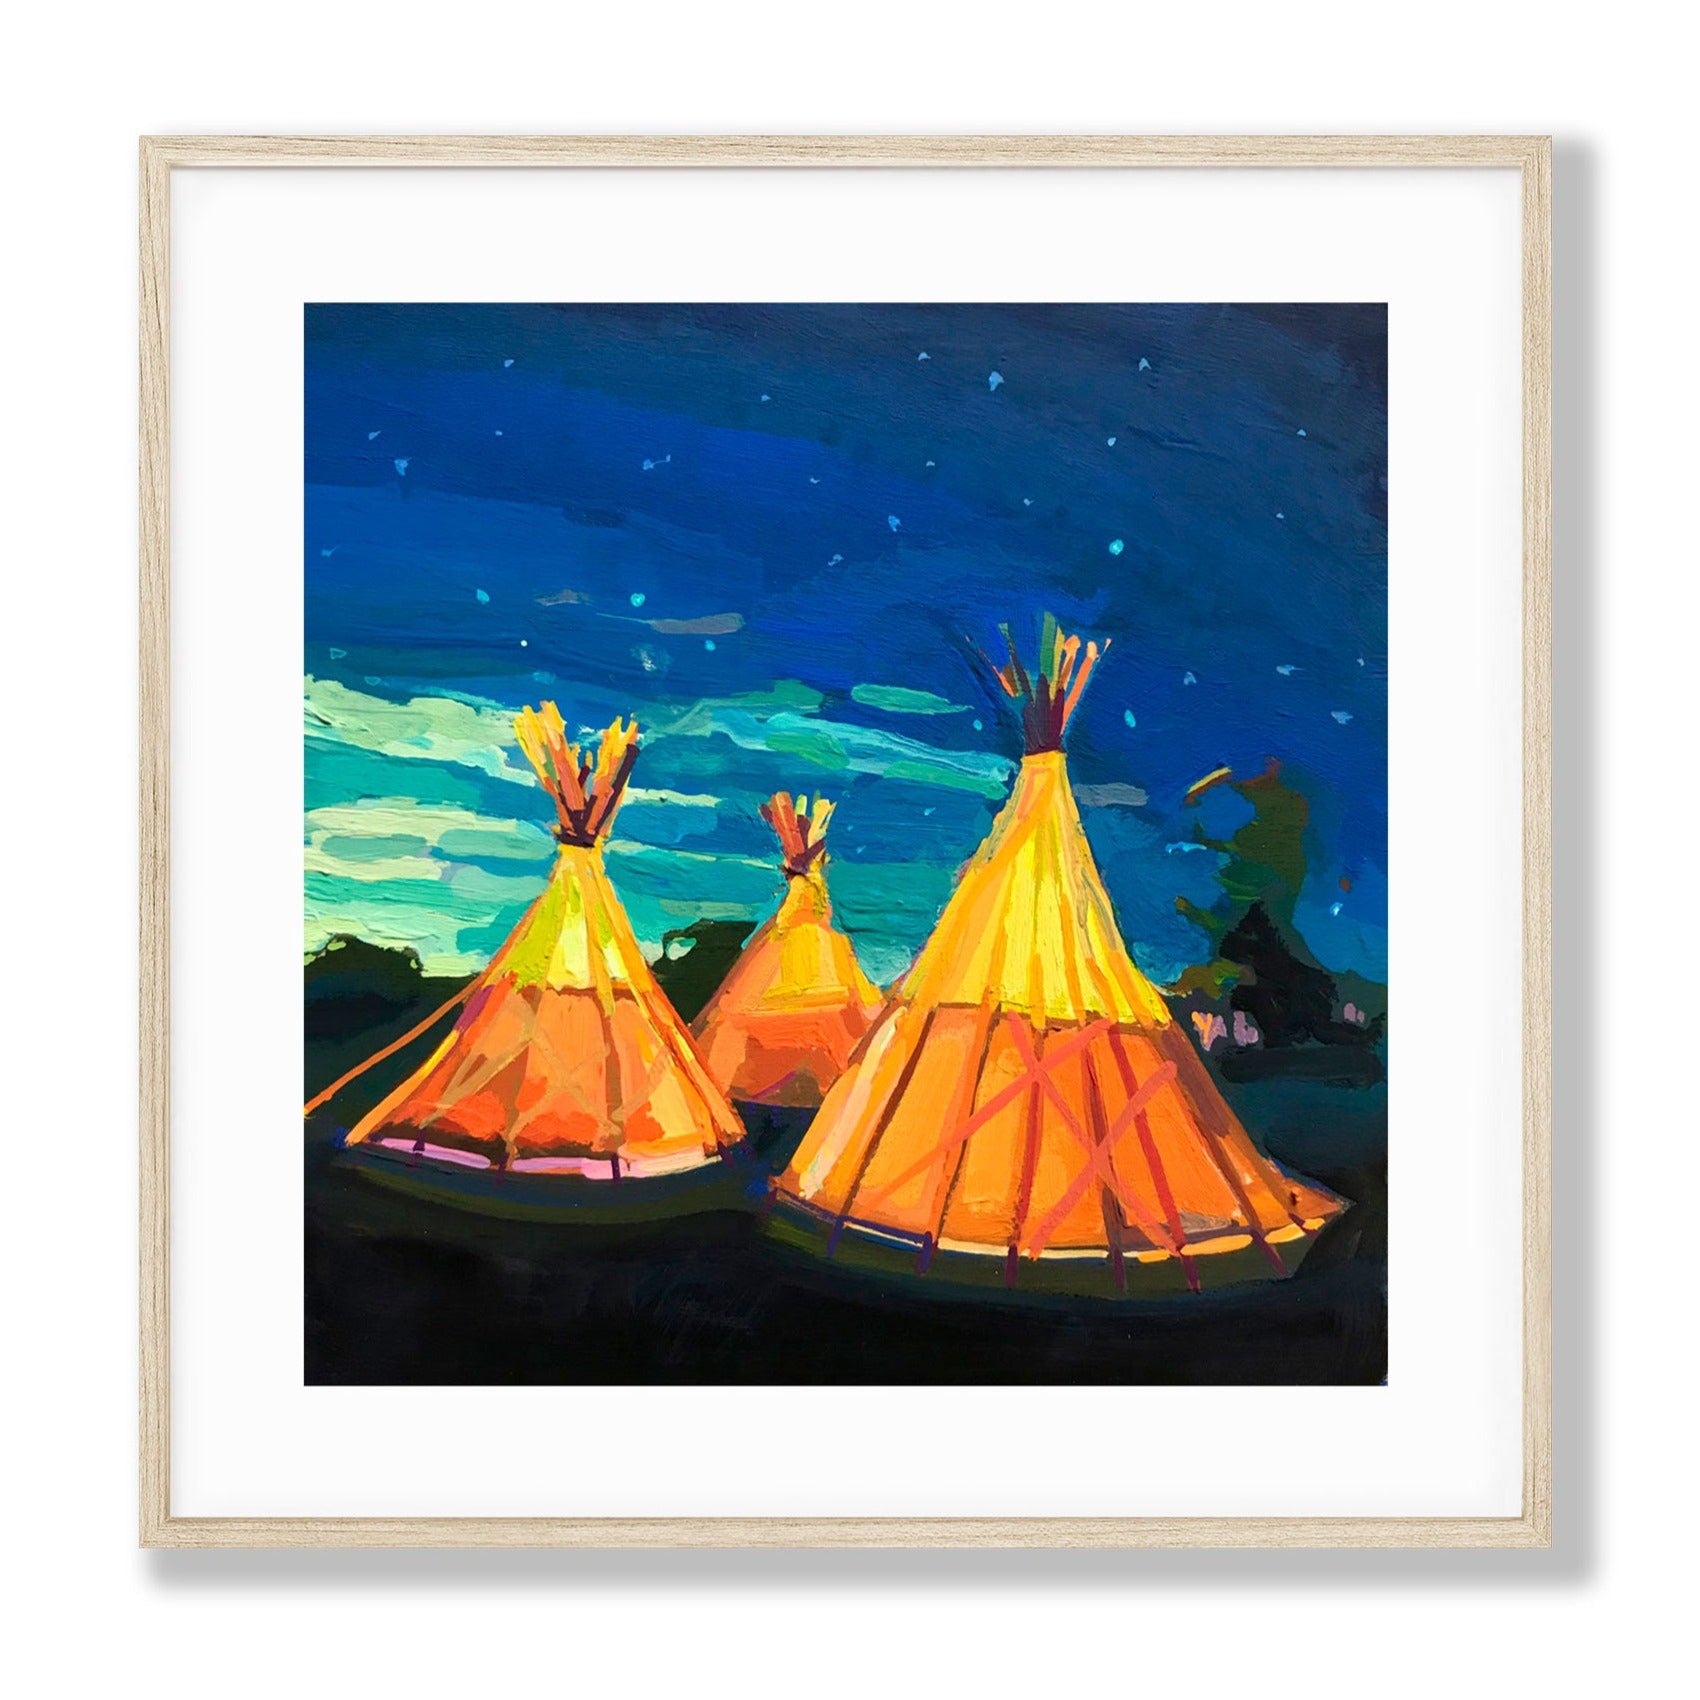 Buy Canvas Frame (16x20 canvas artwork only) at New Braunfels, TX